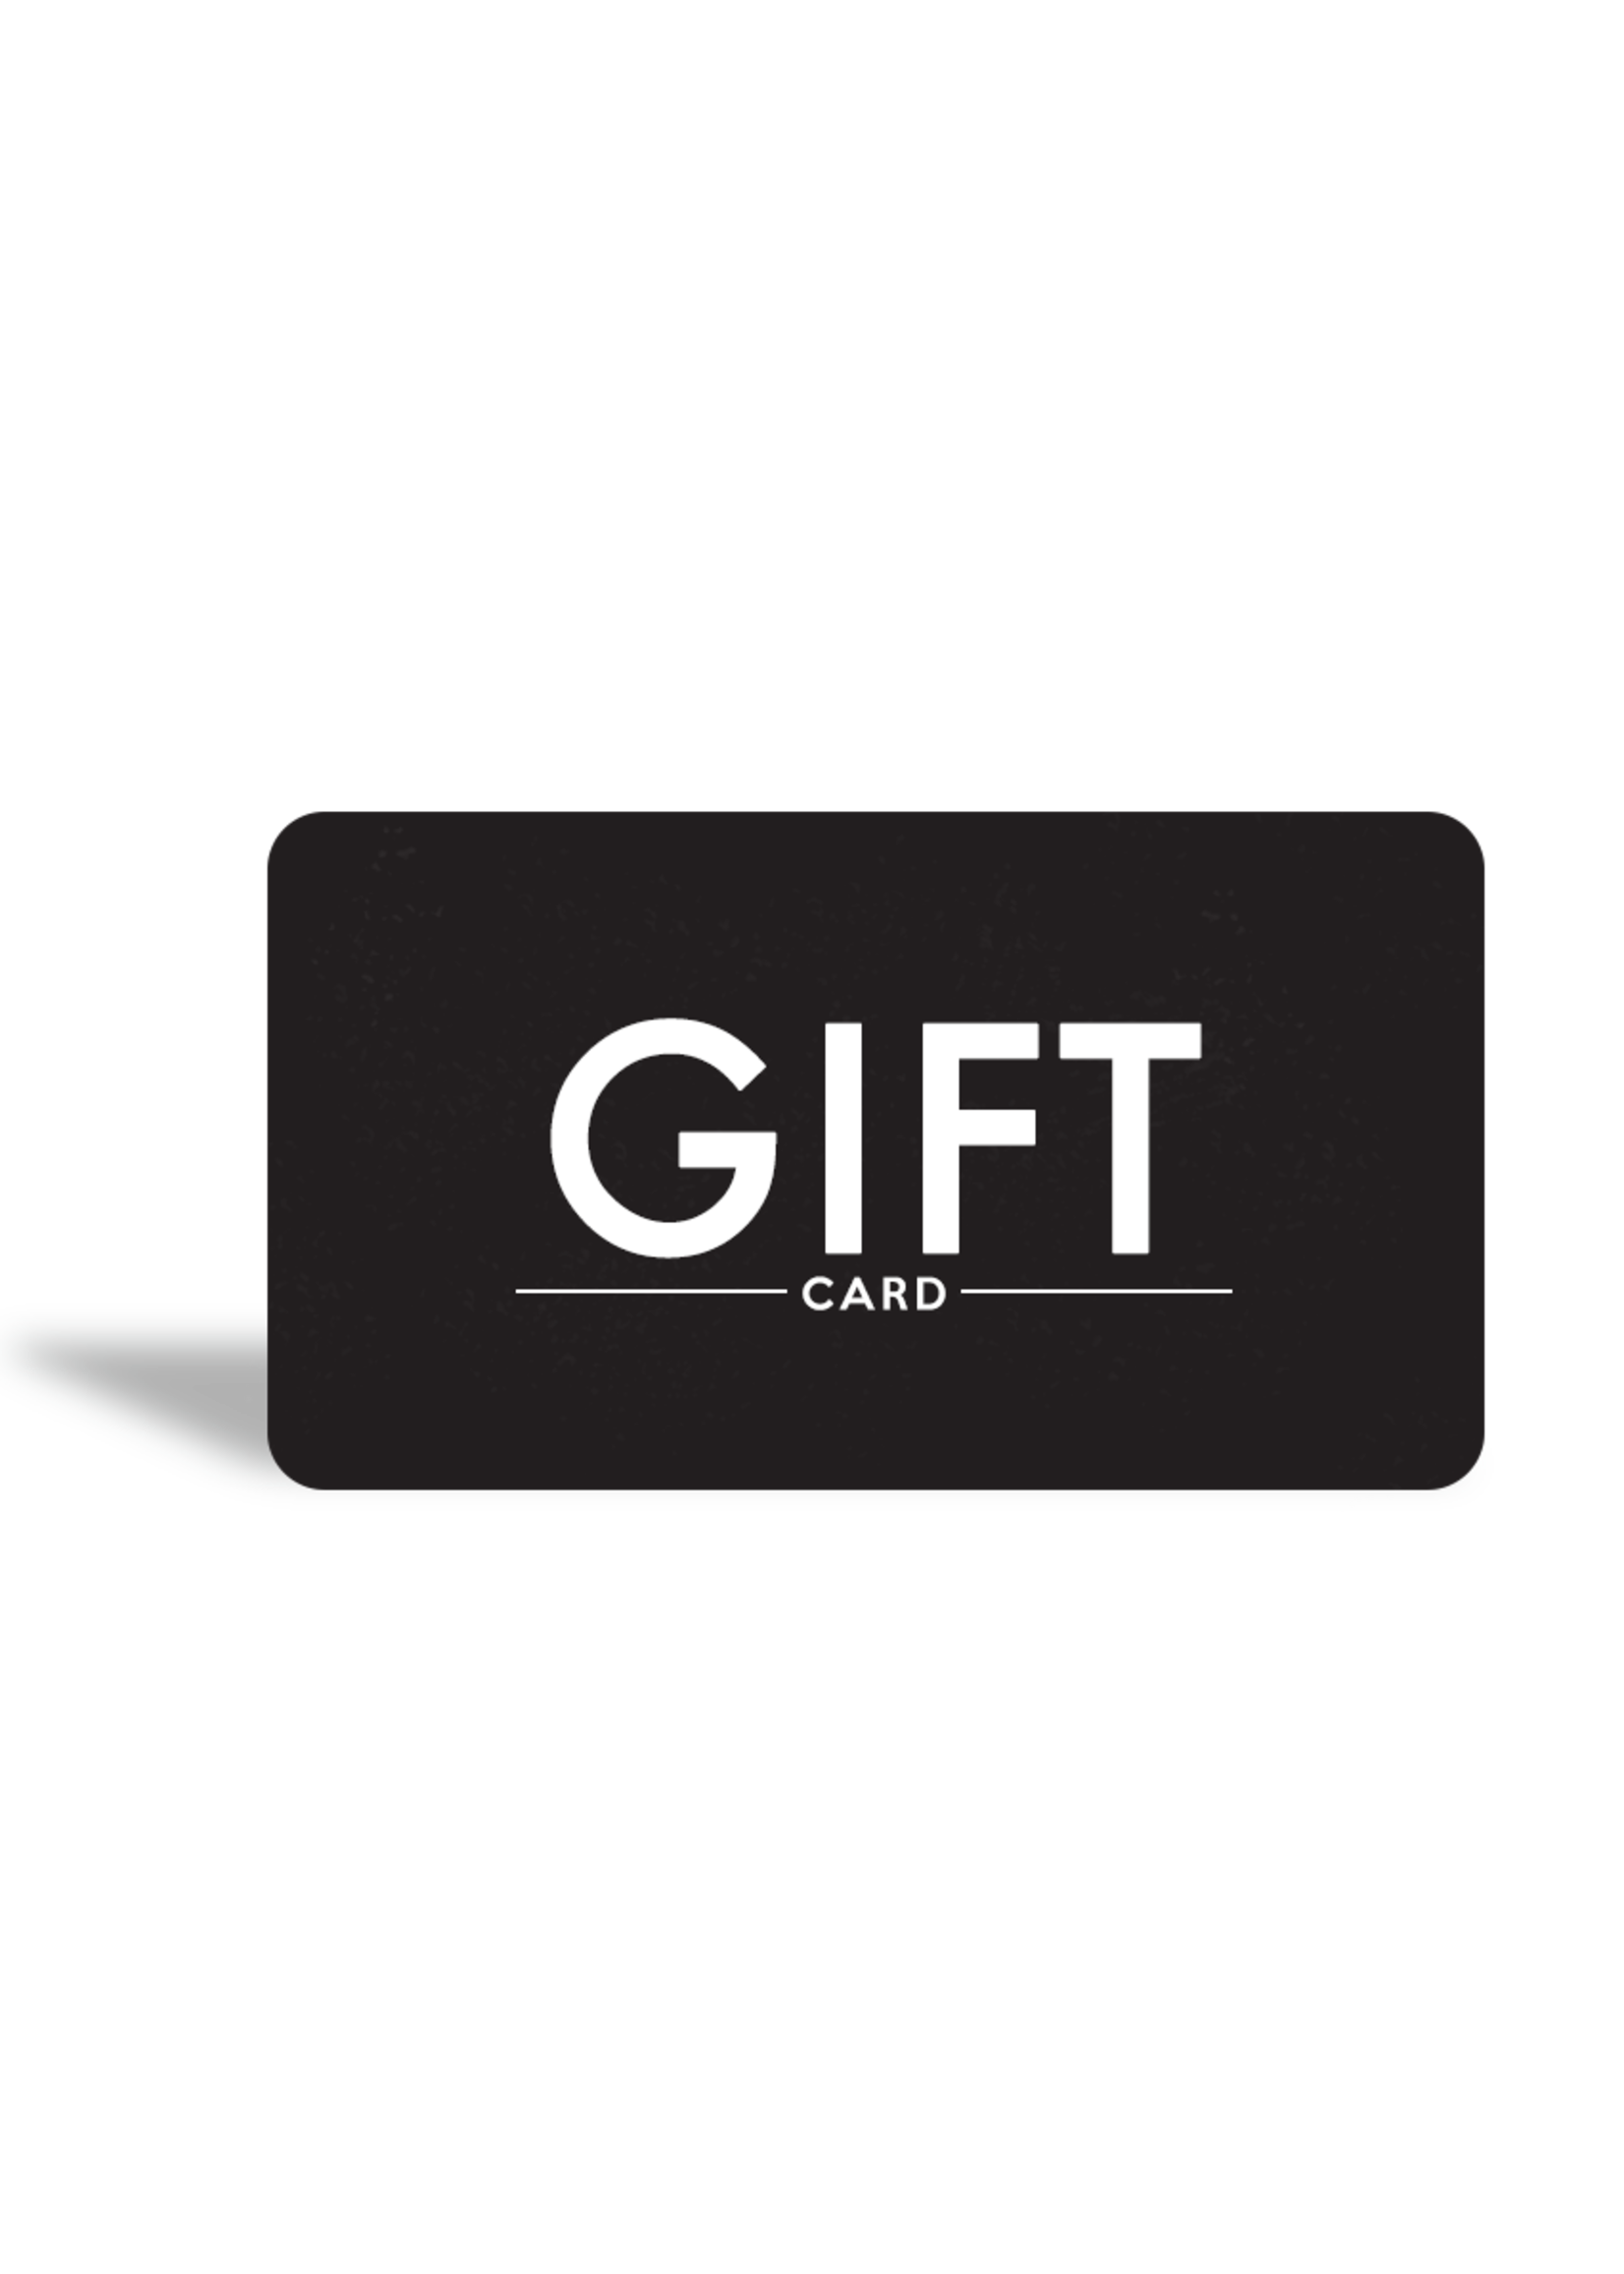 Gift Card online - $25